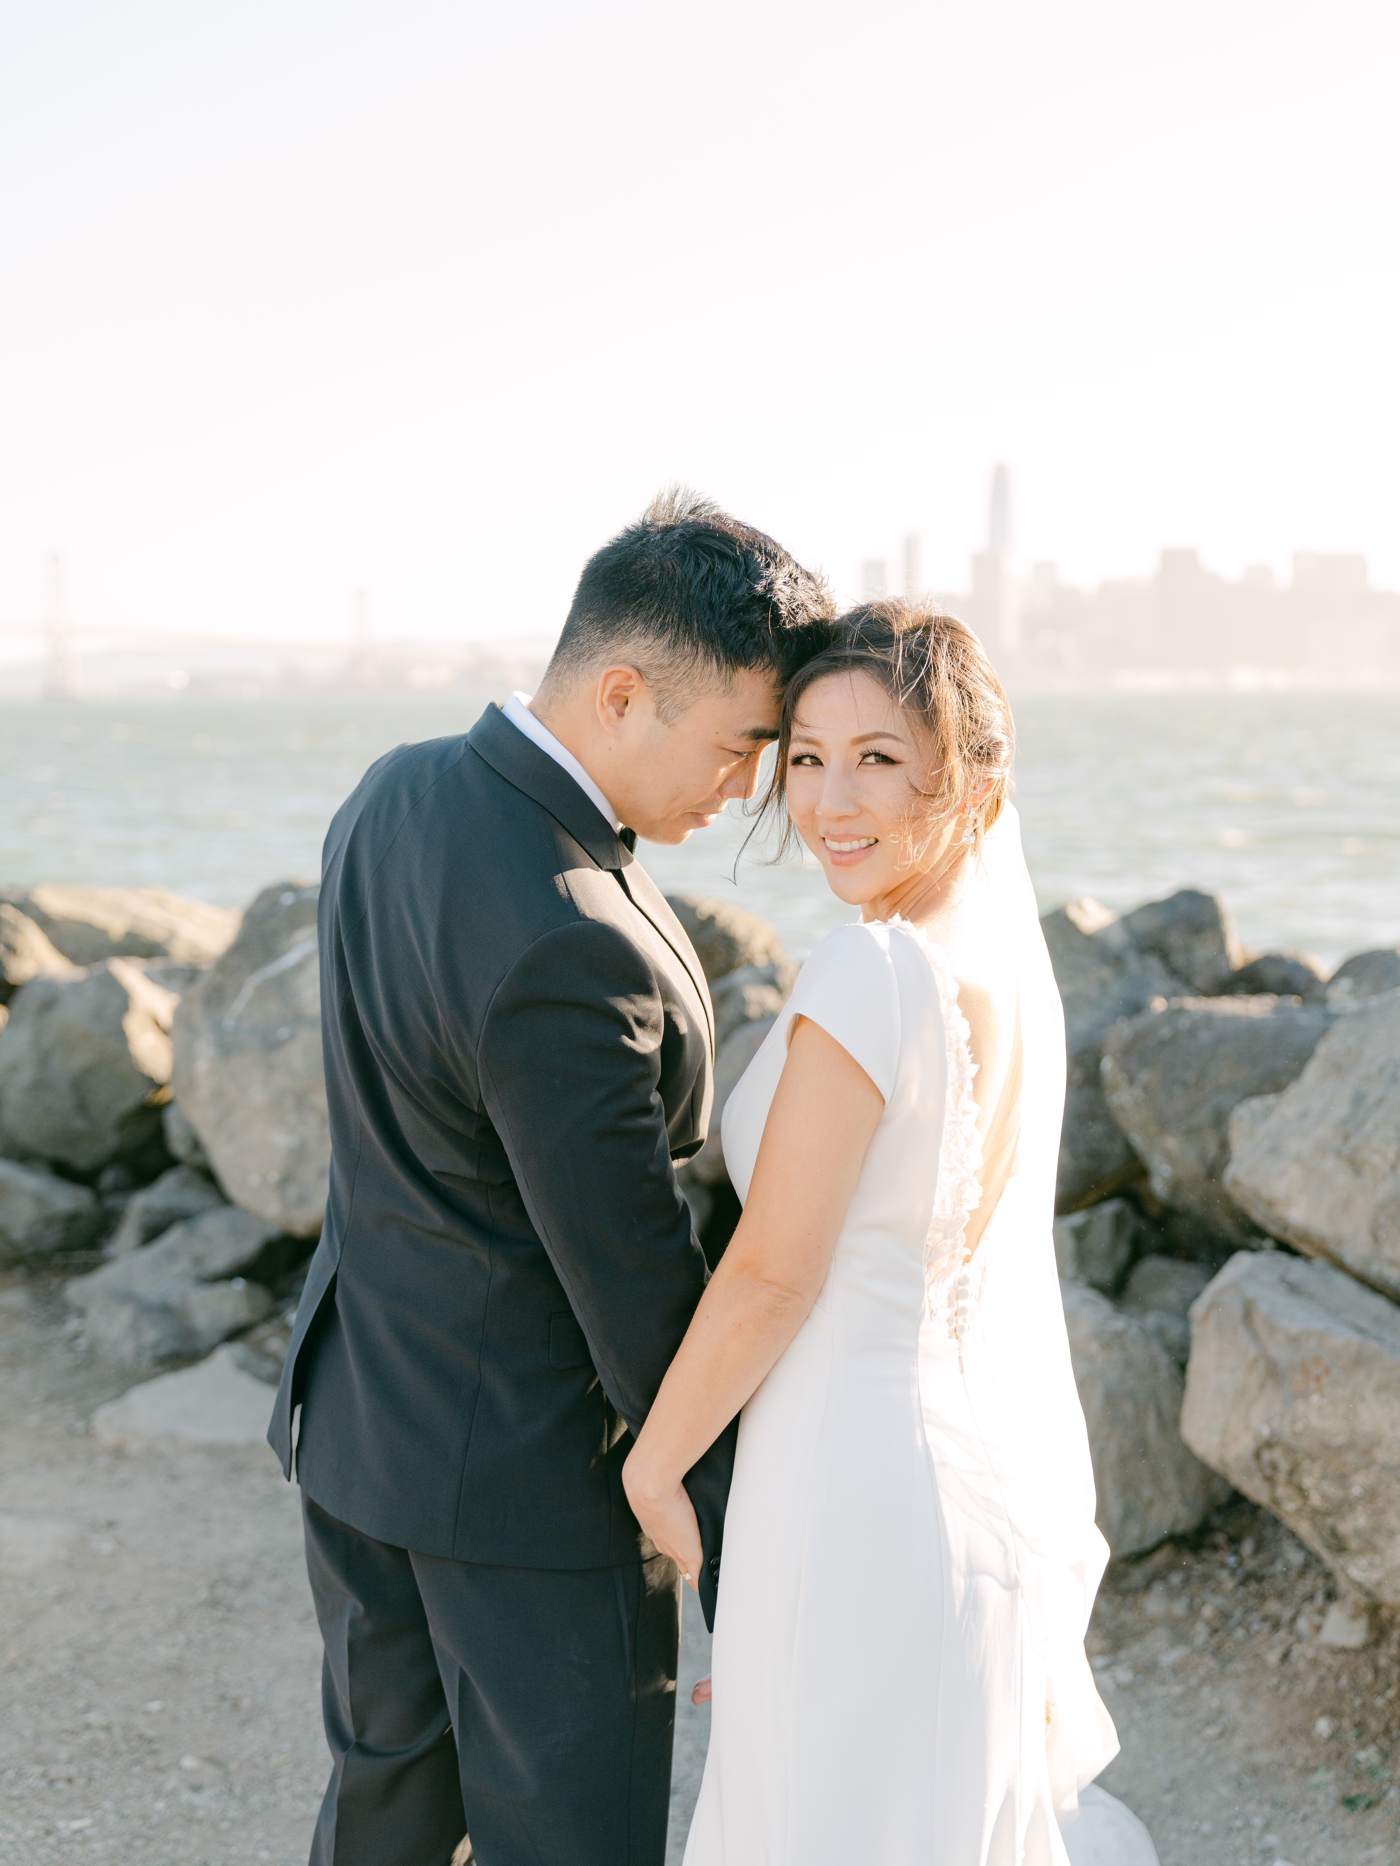 Bride and groom portraits at Aracely Cafe